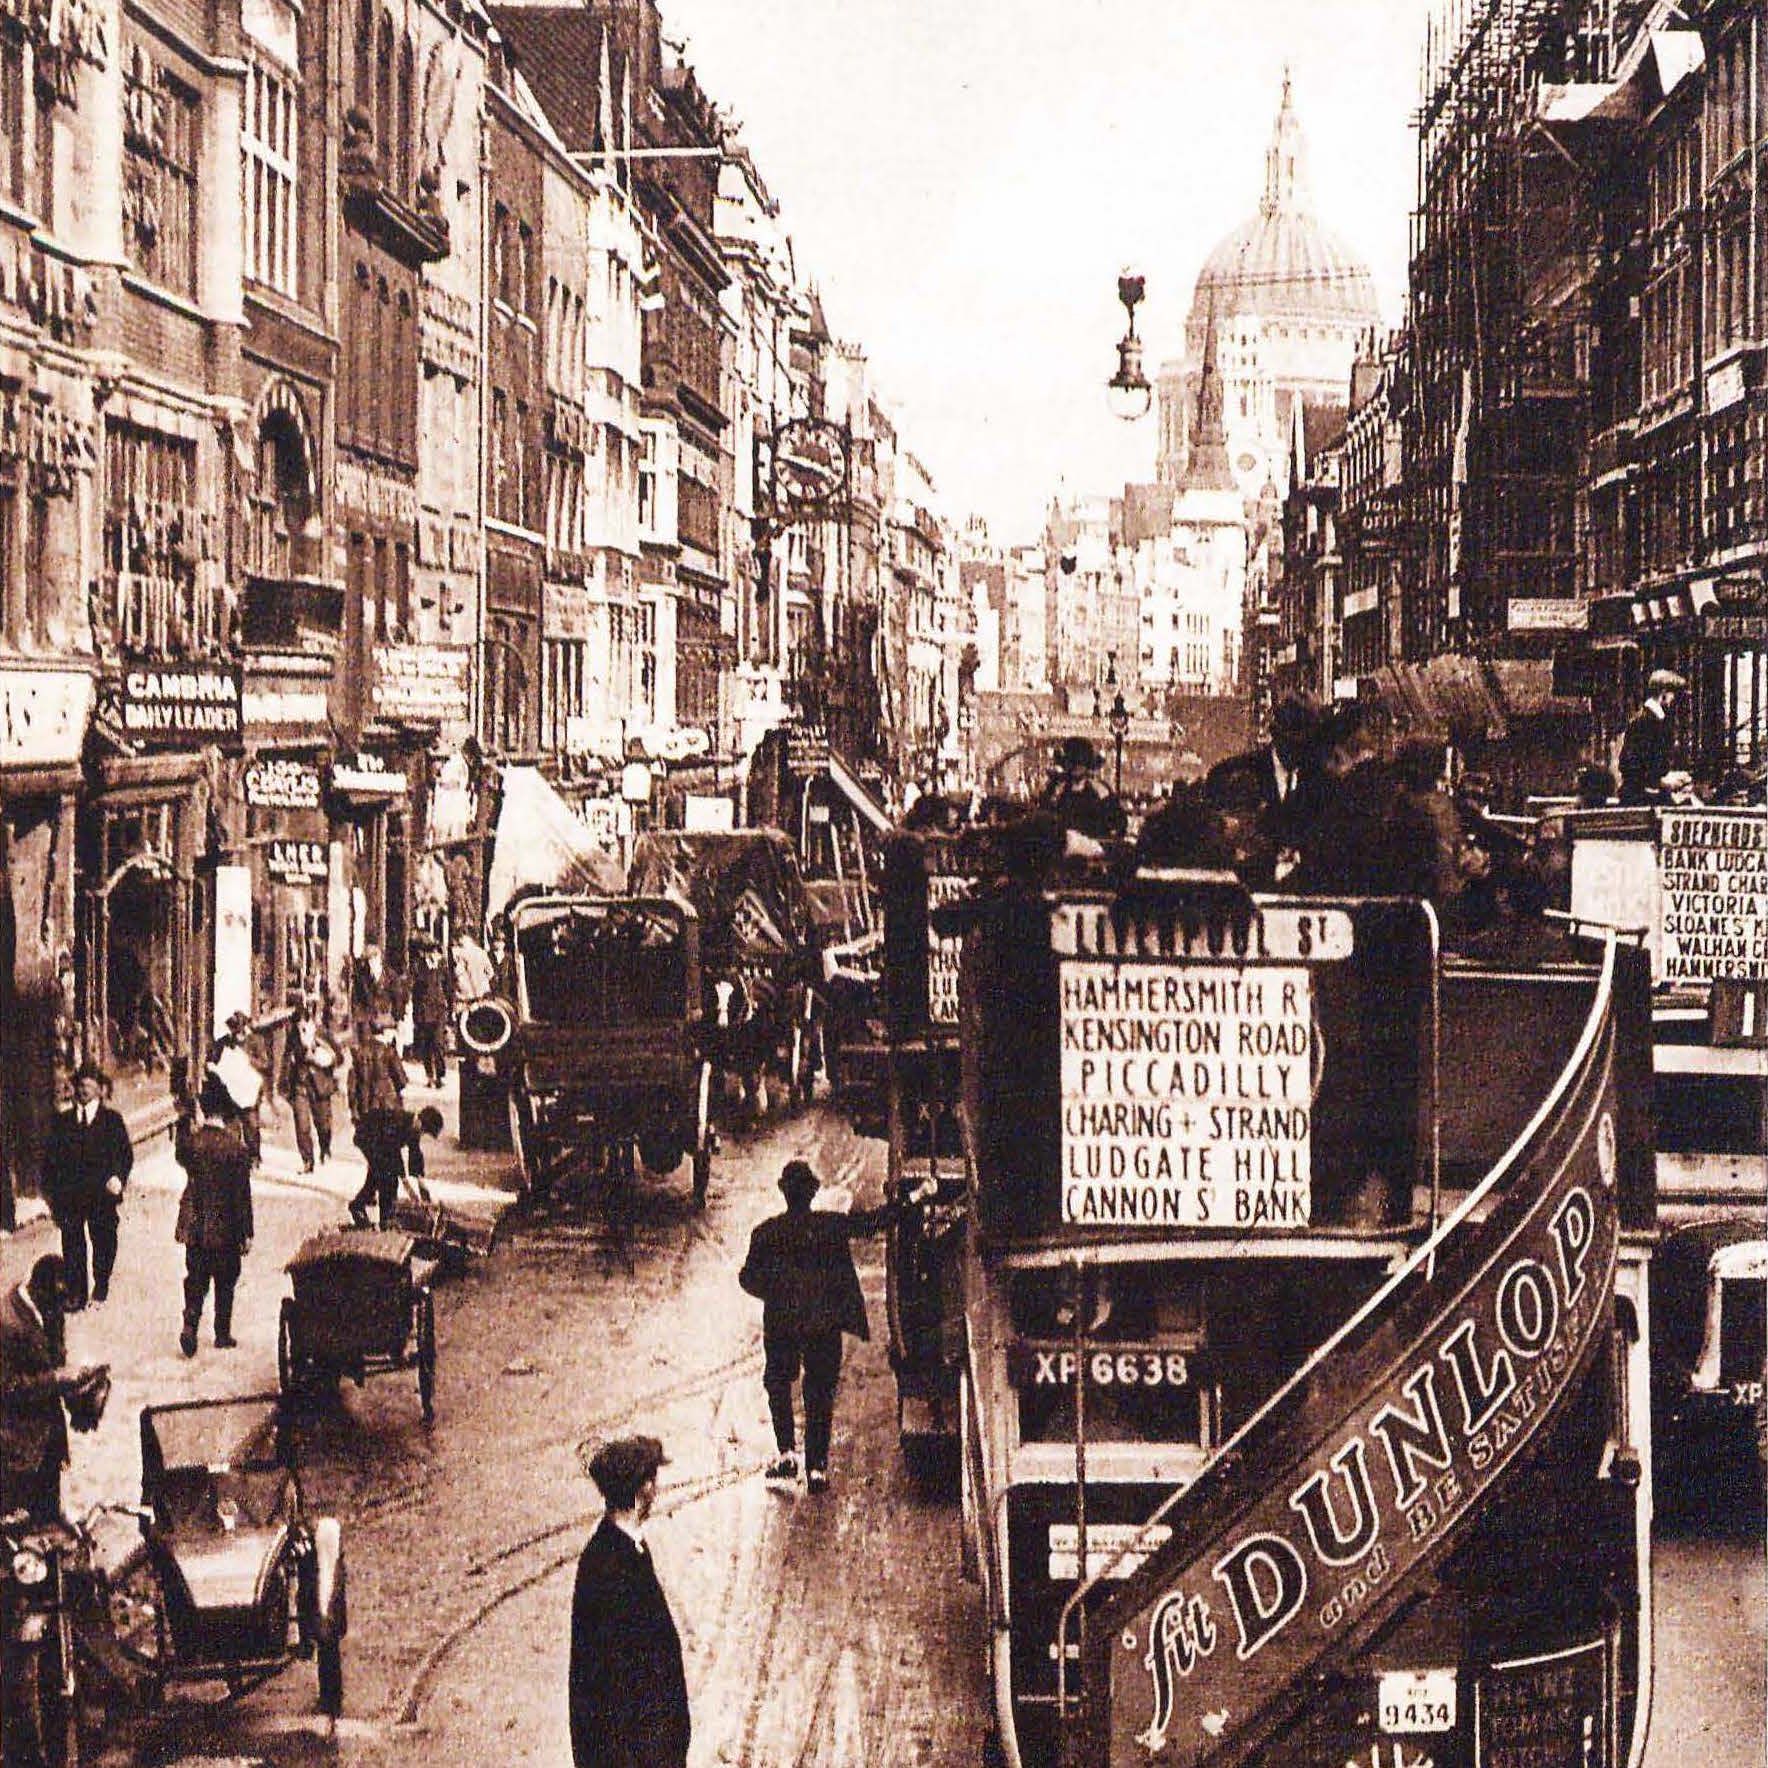 With Camera and Record, Disc 3, Side B: “Fleet Street – Conversation”